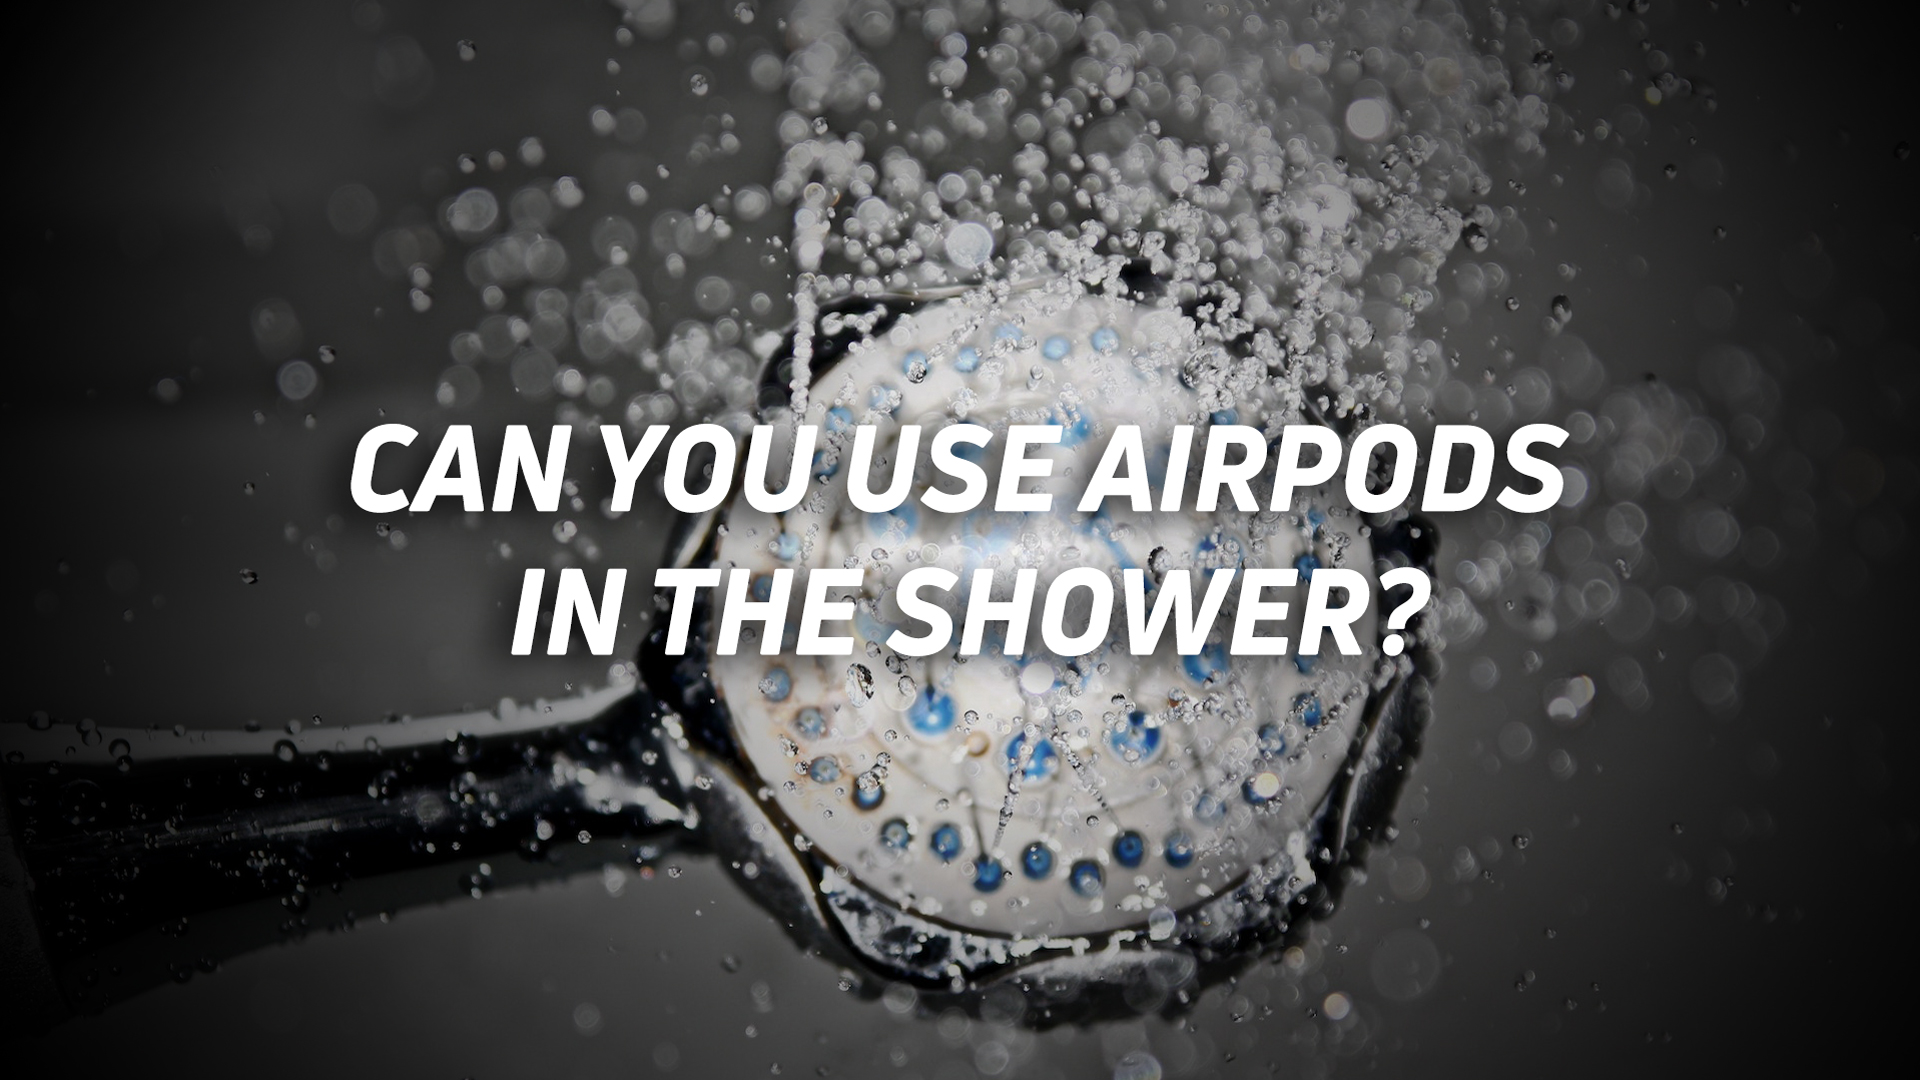 A photo of a showerhead spraying the camera, with the text "can you use AirPods in the shower?" overlaid.